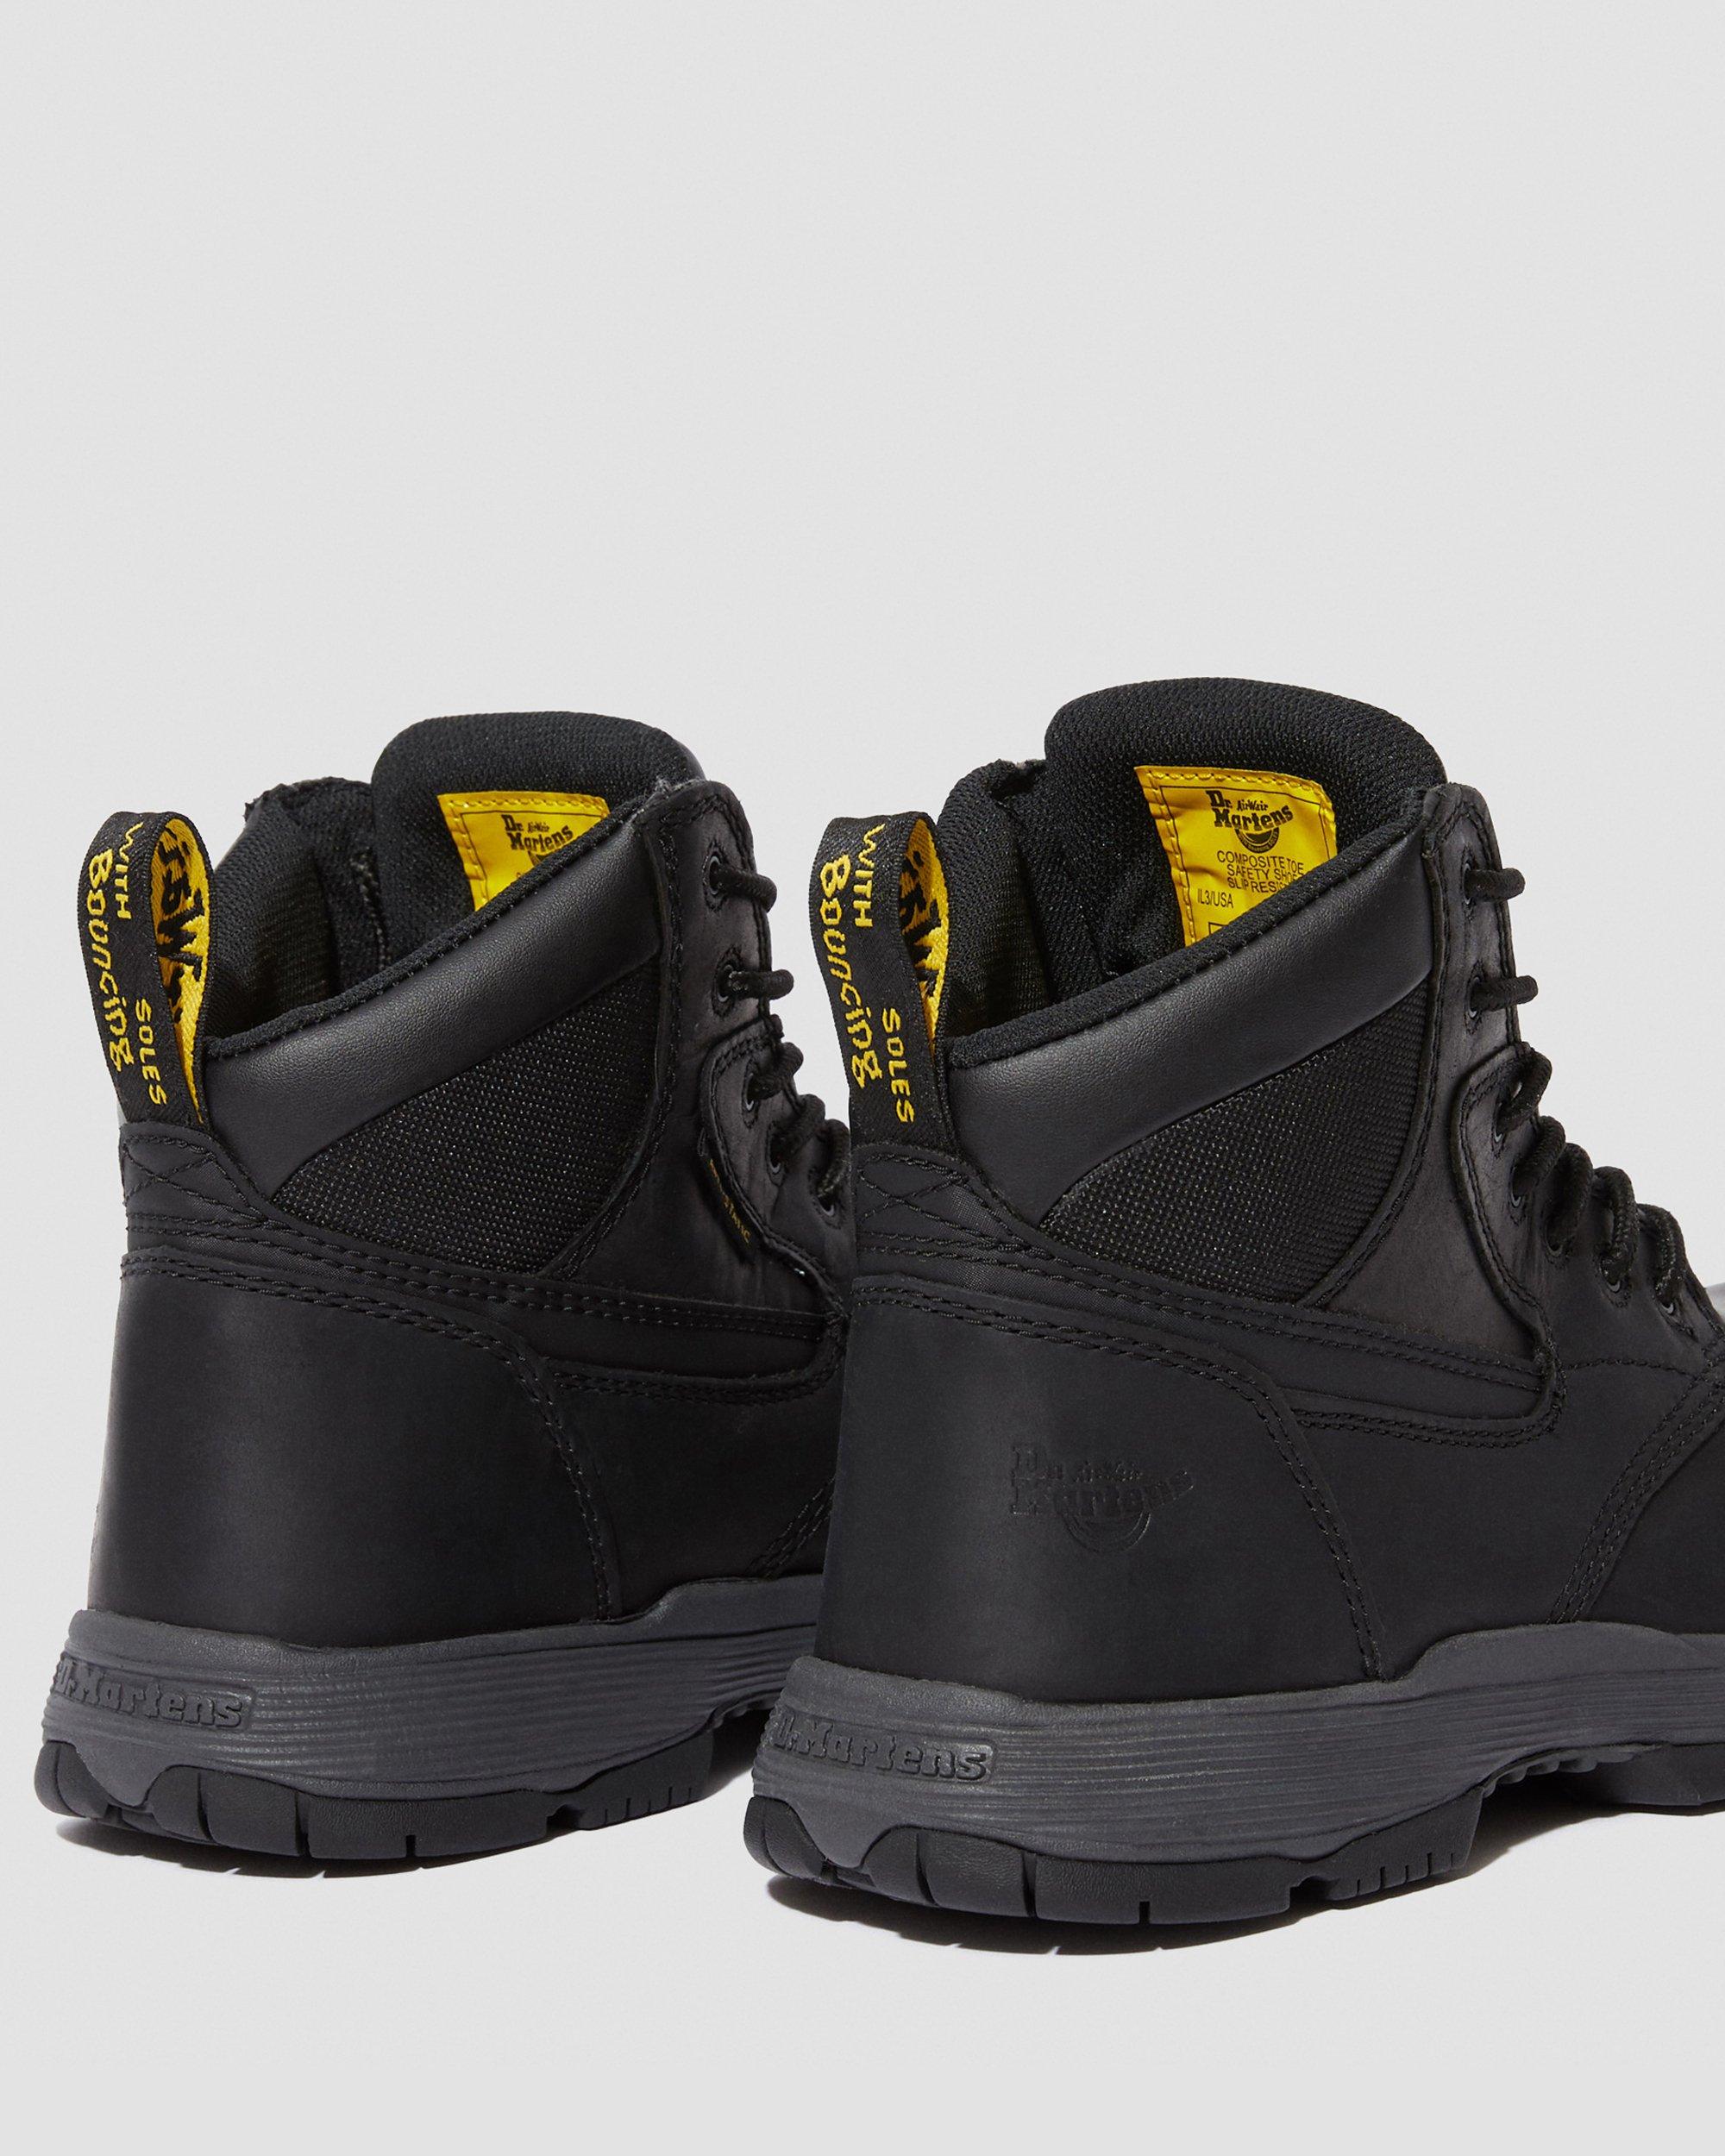 dr martens corvid safety boots cheap online